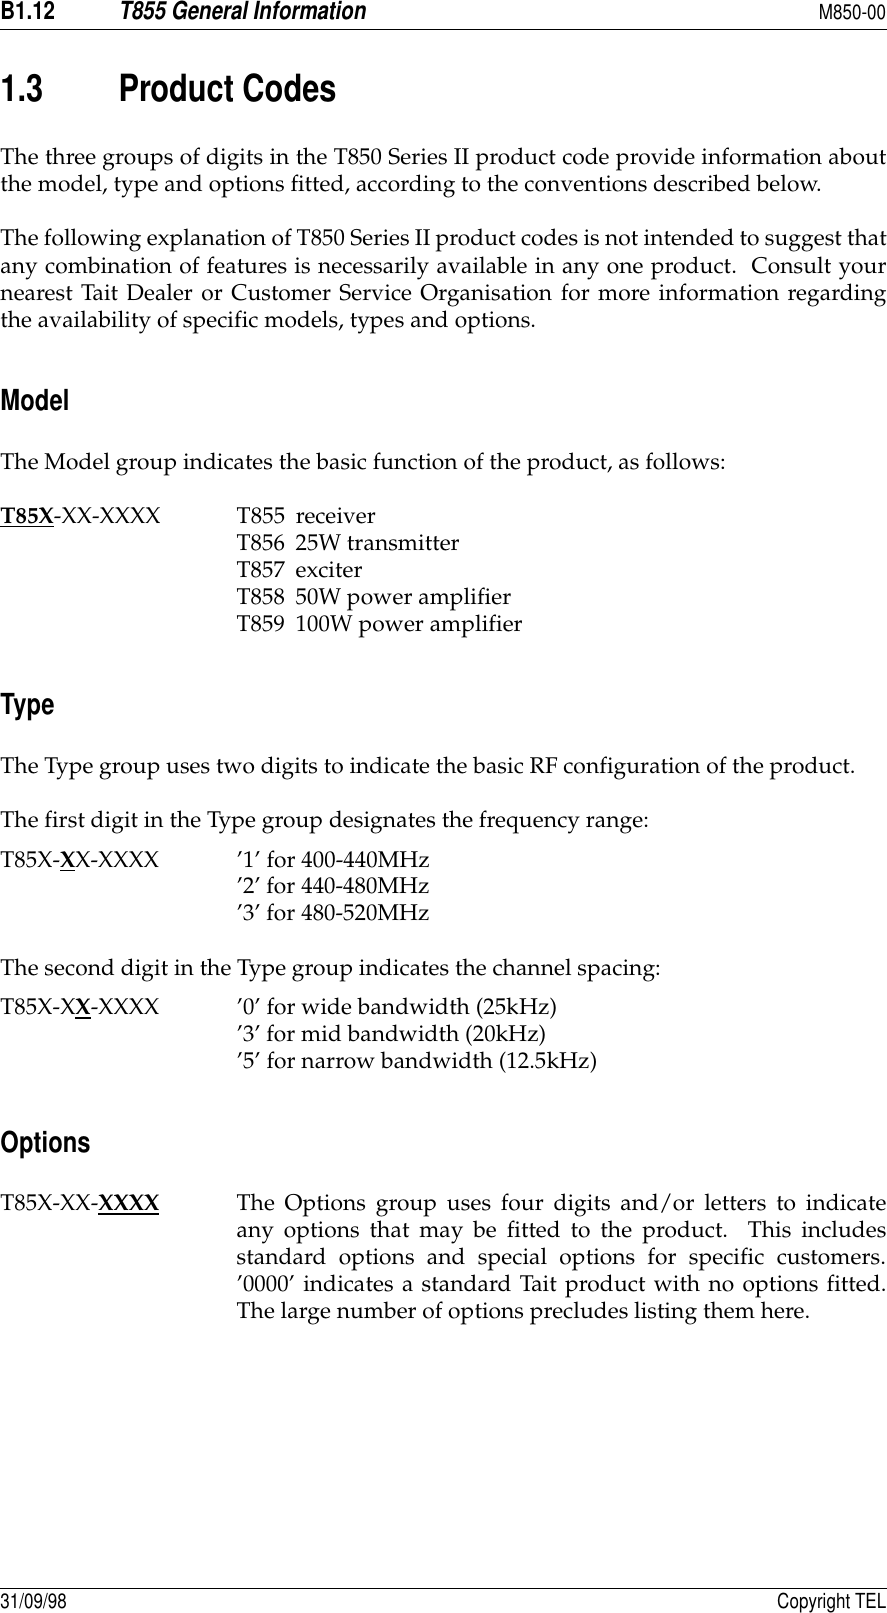 B1.12T855 General InformationM850-0031/09/98 Copyright TEL1.3 Product CodesThe three groups of digits in the T850 Series II product code provide information aboutthe model, type and options fitted, according to the conventions described below.The following explanation of T850 Series II product codes is not intended to suggest thatany combination of features is necessarily available in any one product.  Consult yournearest Tait Dealer or Customer Service Organisation for more information regardingthe availability of specific models, types and options.ModelThe Model group indicates the basic function of the product, as follows:T85X-XX-XXXX T855 receiverT856 25W transmitterT857 exciterT858 50W power amplifierT859 100W power amplifierTypeThe Type group uses two digits to indicate the basic RF configuration of the product.The first digit in the Type group designates the frequency range:T85X-XX-XXXX ’1’ for 400-440MHz’2’ for 440-480MHz’3’ for 480-520MHzThe second digit in the Type group indicates the channel spacing:T85X-XX-XXXX ’0’ for wide bandwidth (25kHz)’3’ for mid bandwidth (20kHz)’5’ for narrow bandwidth (12.5kHz)OptionsT85X-XX-XXXX The Options group uses four digits and/or letters to indicateany options that may be fitted to the product.  This includesstandard options and special options for specific customers.’0000’ indicates a standard Tait product with no options fitted.The large number of options precludes listing them here.